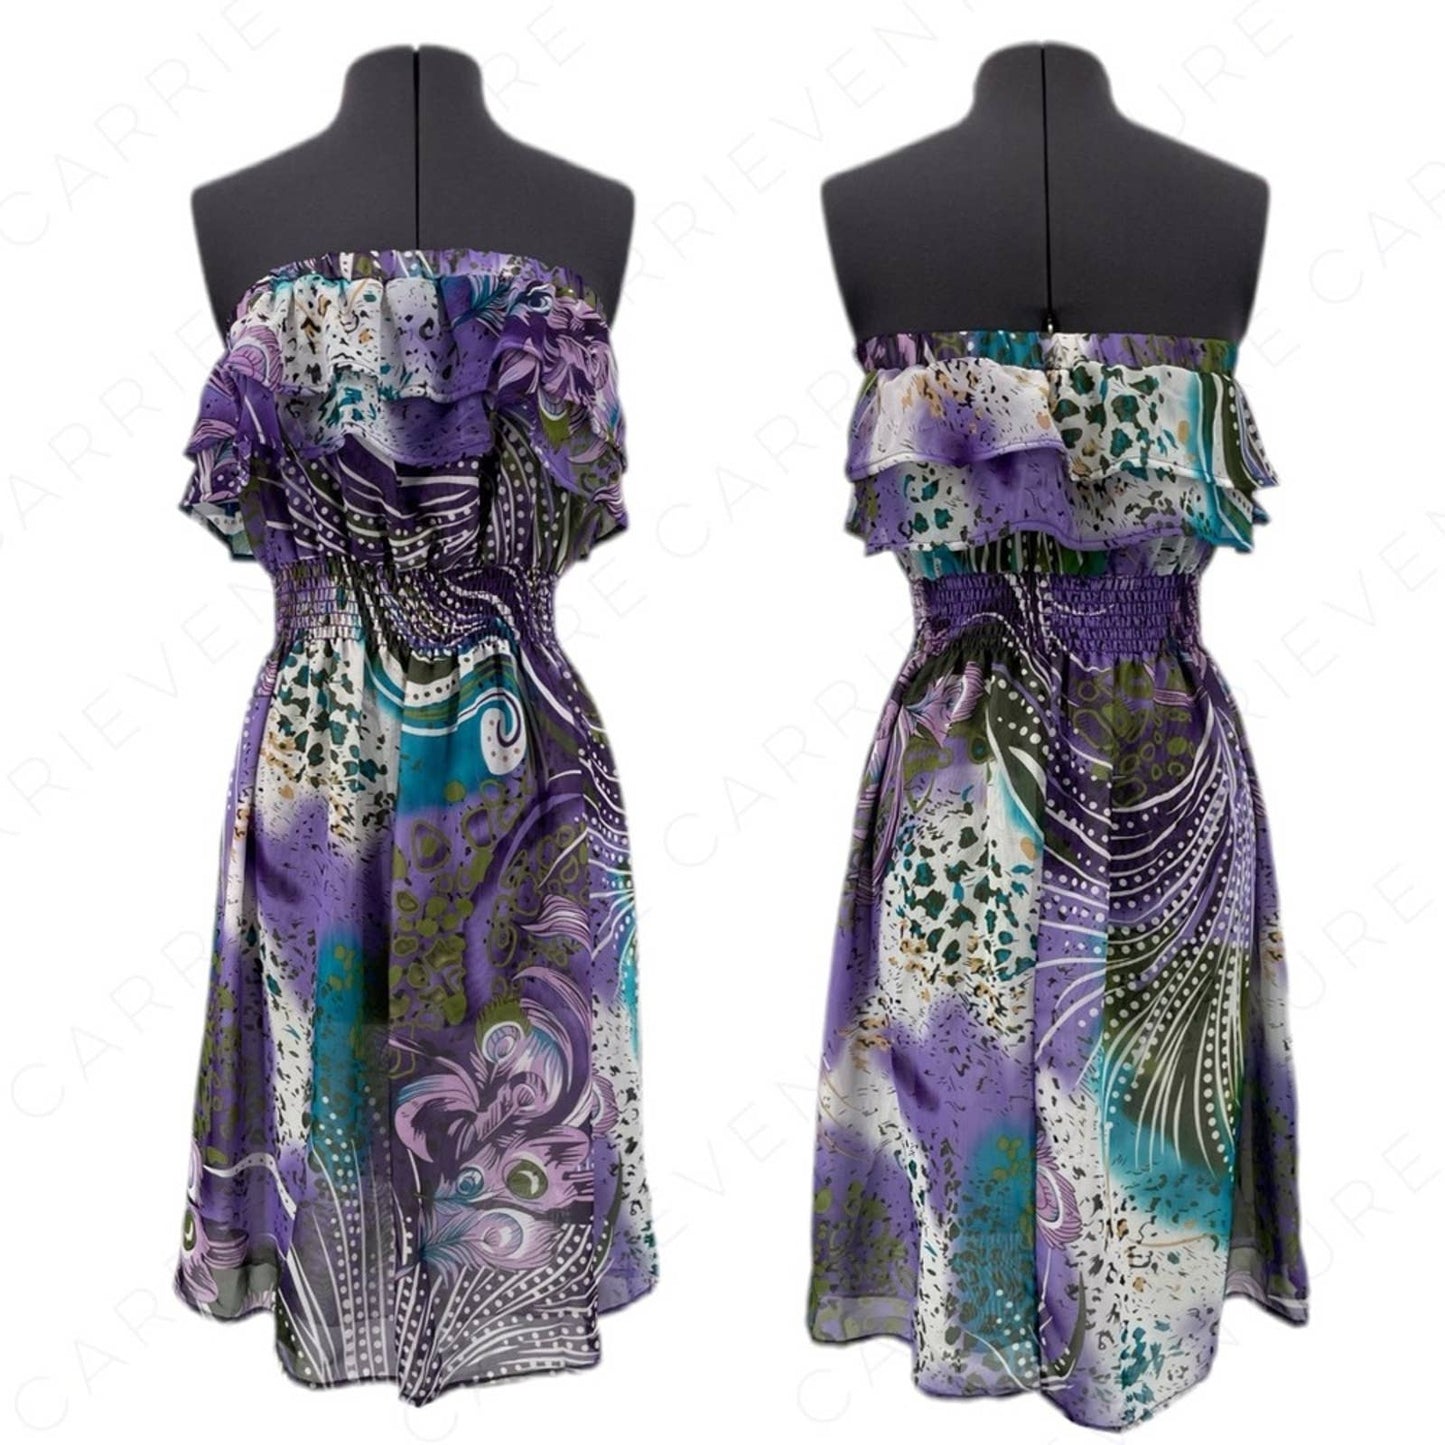 Ariella Purple Floral Printed Chiffon Dress Strapless Elasticized Stretchy Lined Size S